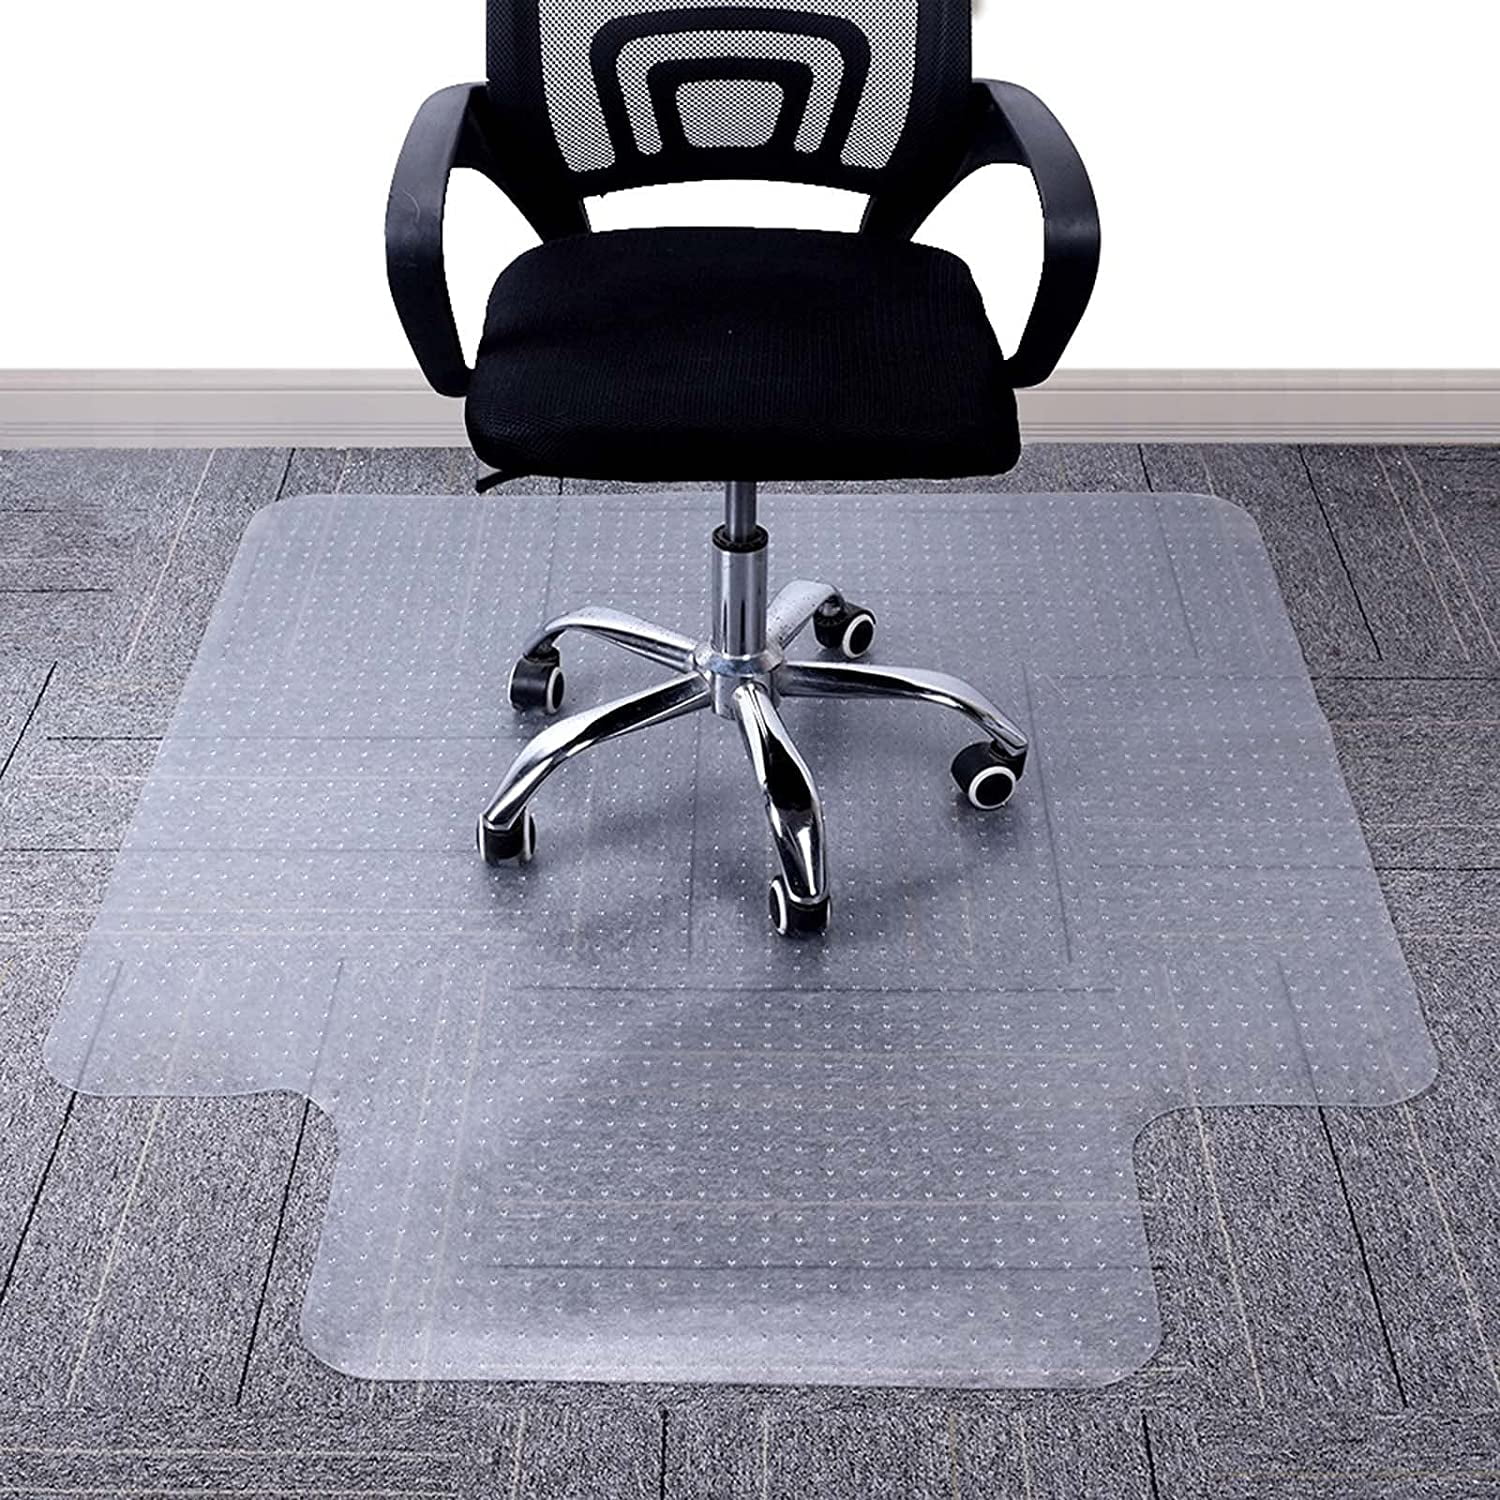 Good for Desks Easy Glide Transparent Mats for Chairs Floor Mats for Office 36 x 48 inches Premium Material Chair Mat with Lip Chair Mat 